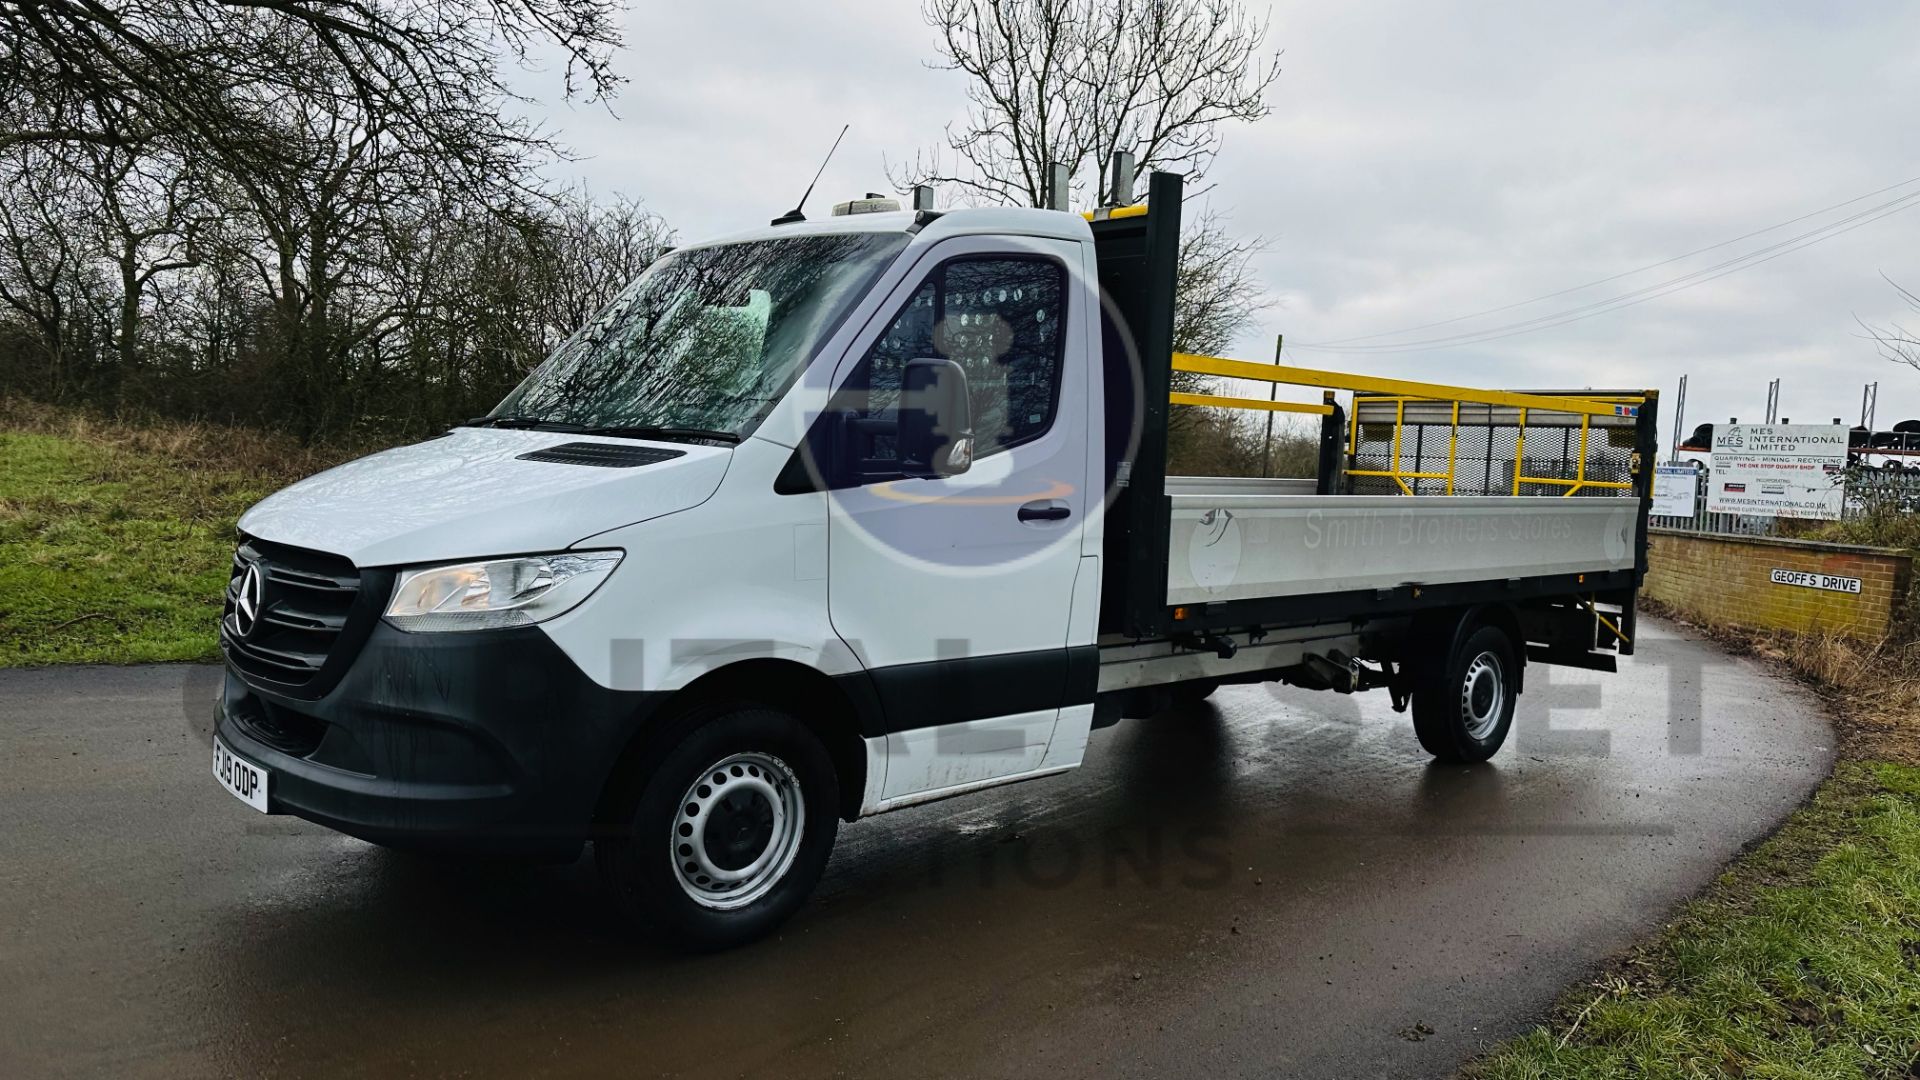 MERCEDES-BENZ SPRINTER 314 CDI *LWB - DROPSIDE* (2019 - EURO 6) AUTOMATIC *TAIL-LIFT* (3500 KG) - Image 7 of 40